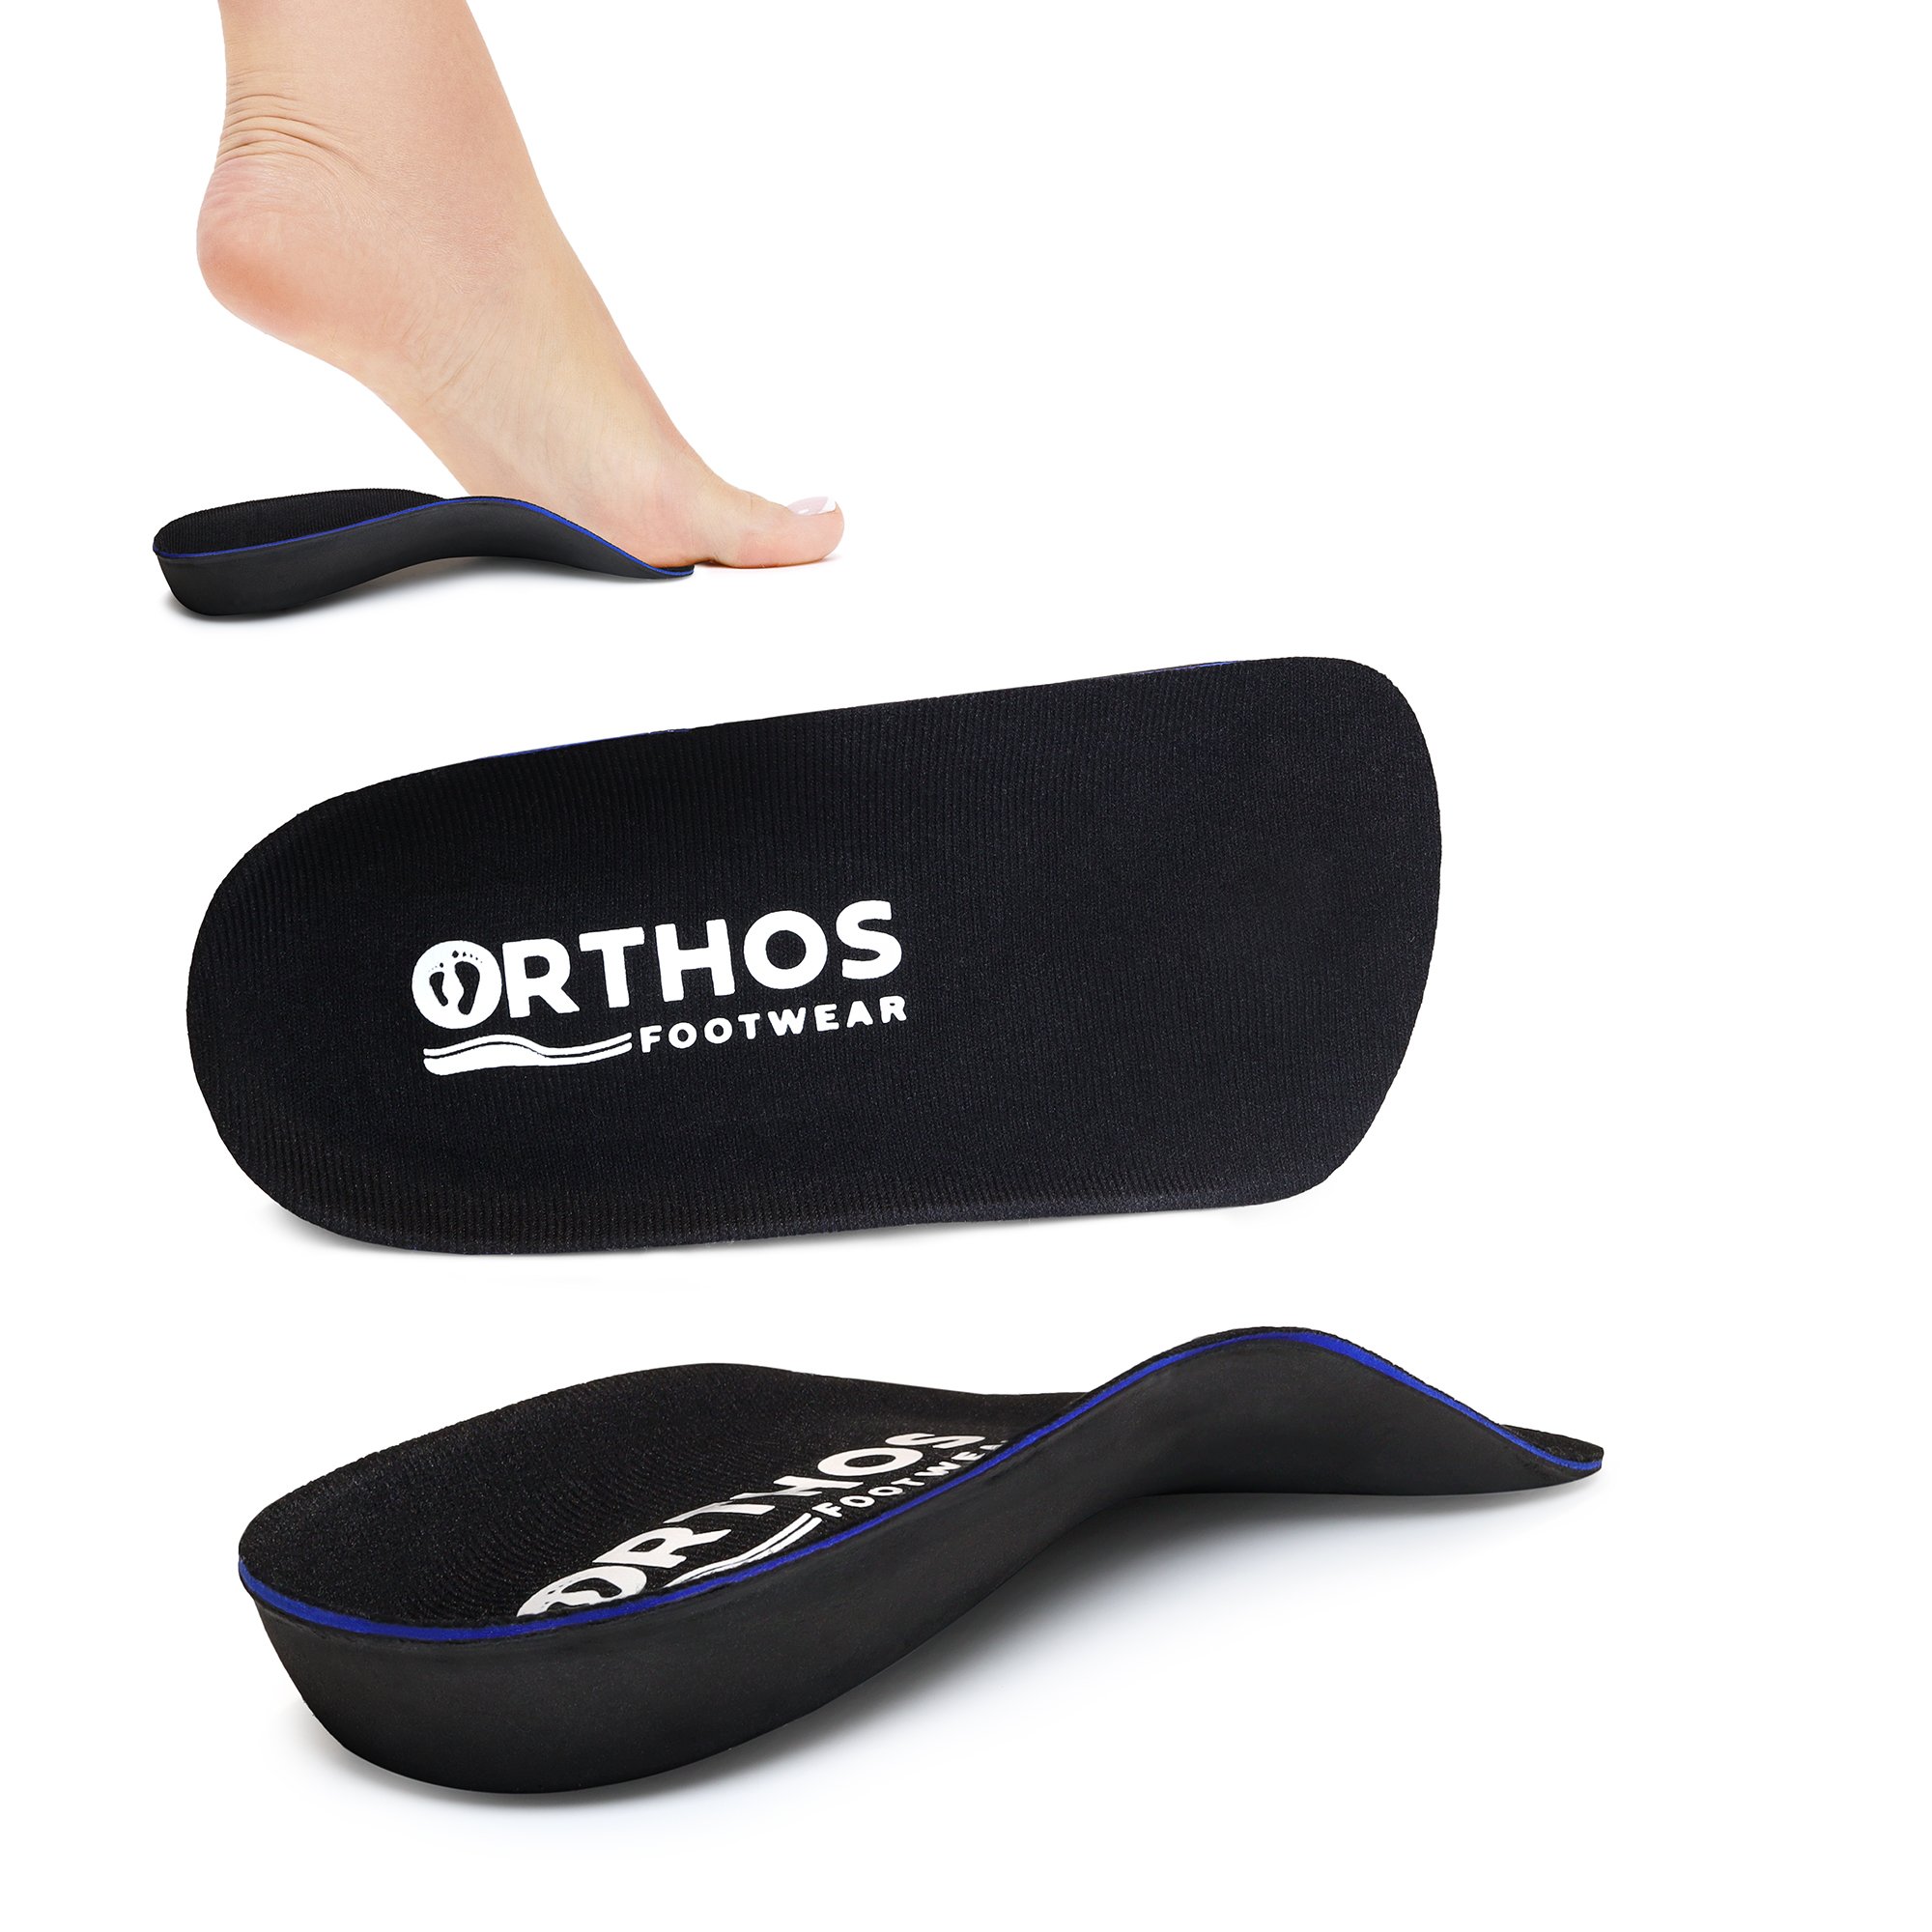 Orthos Shearling Orthotic Insoles Mens 8 E Inserts W/ Arc size Womens 9 